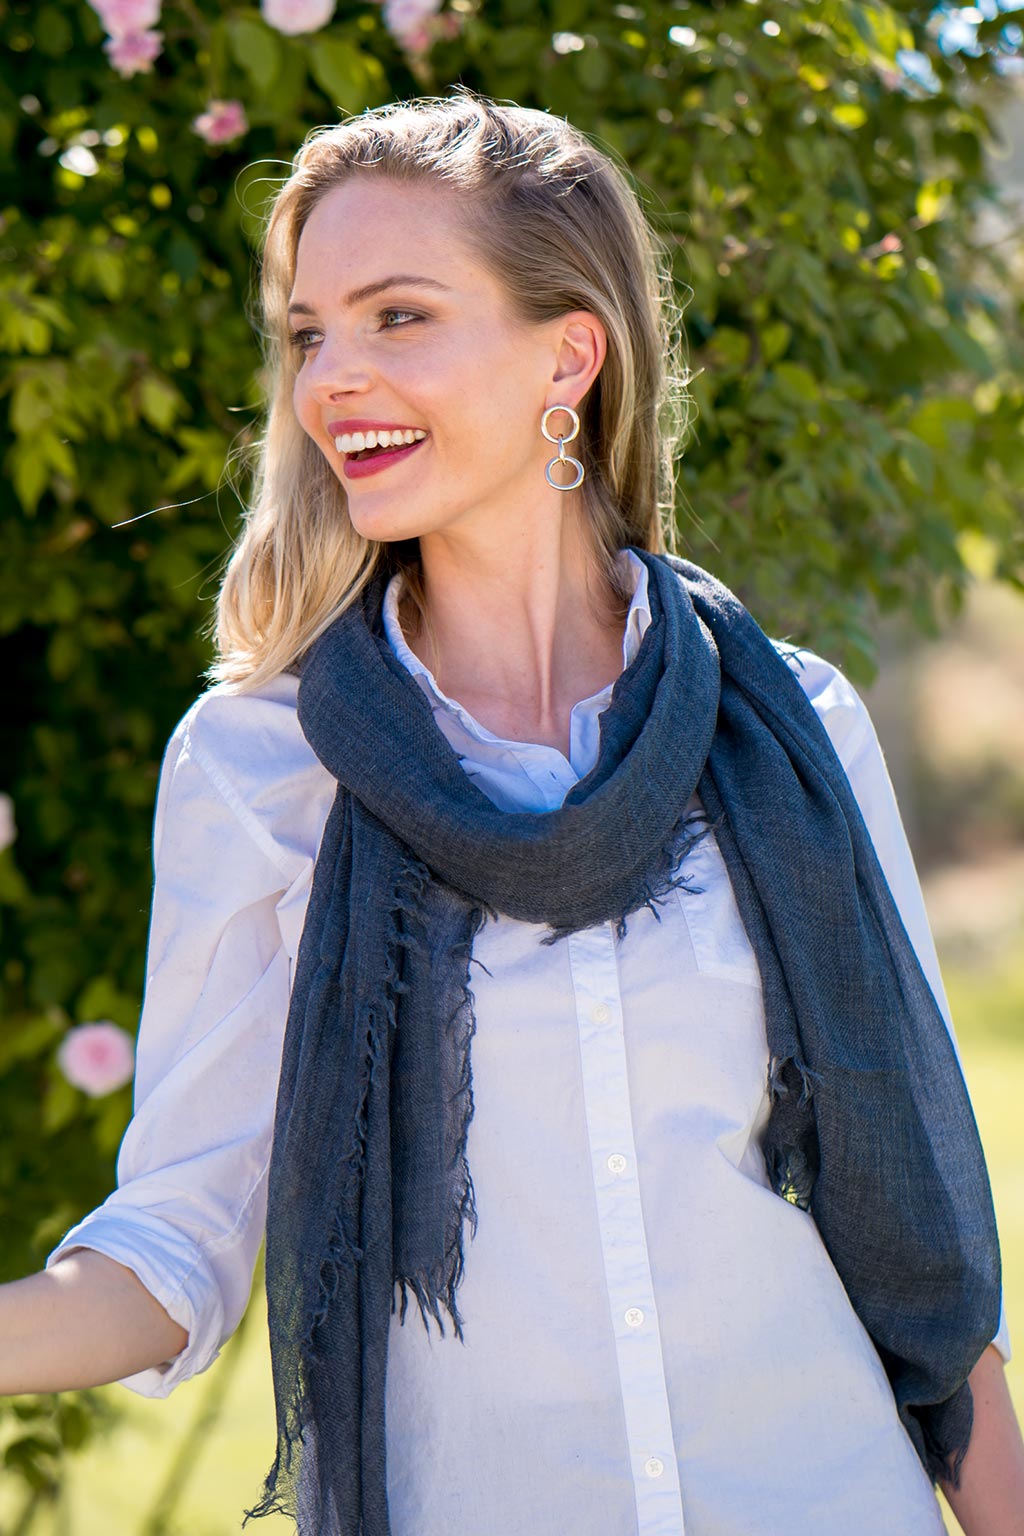 Alpine Cashmere Featherweight Alta Scarf in Charcoal Gray Melange